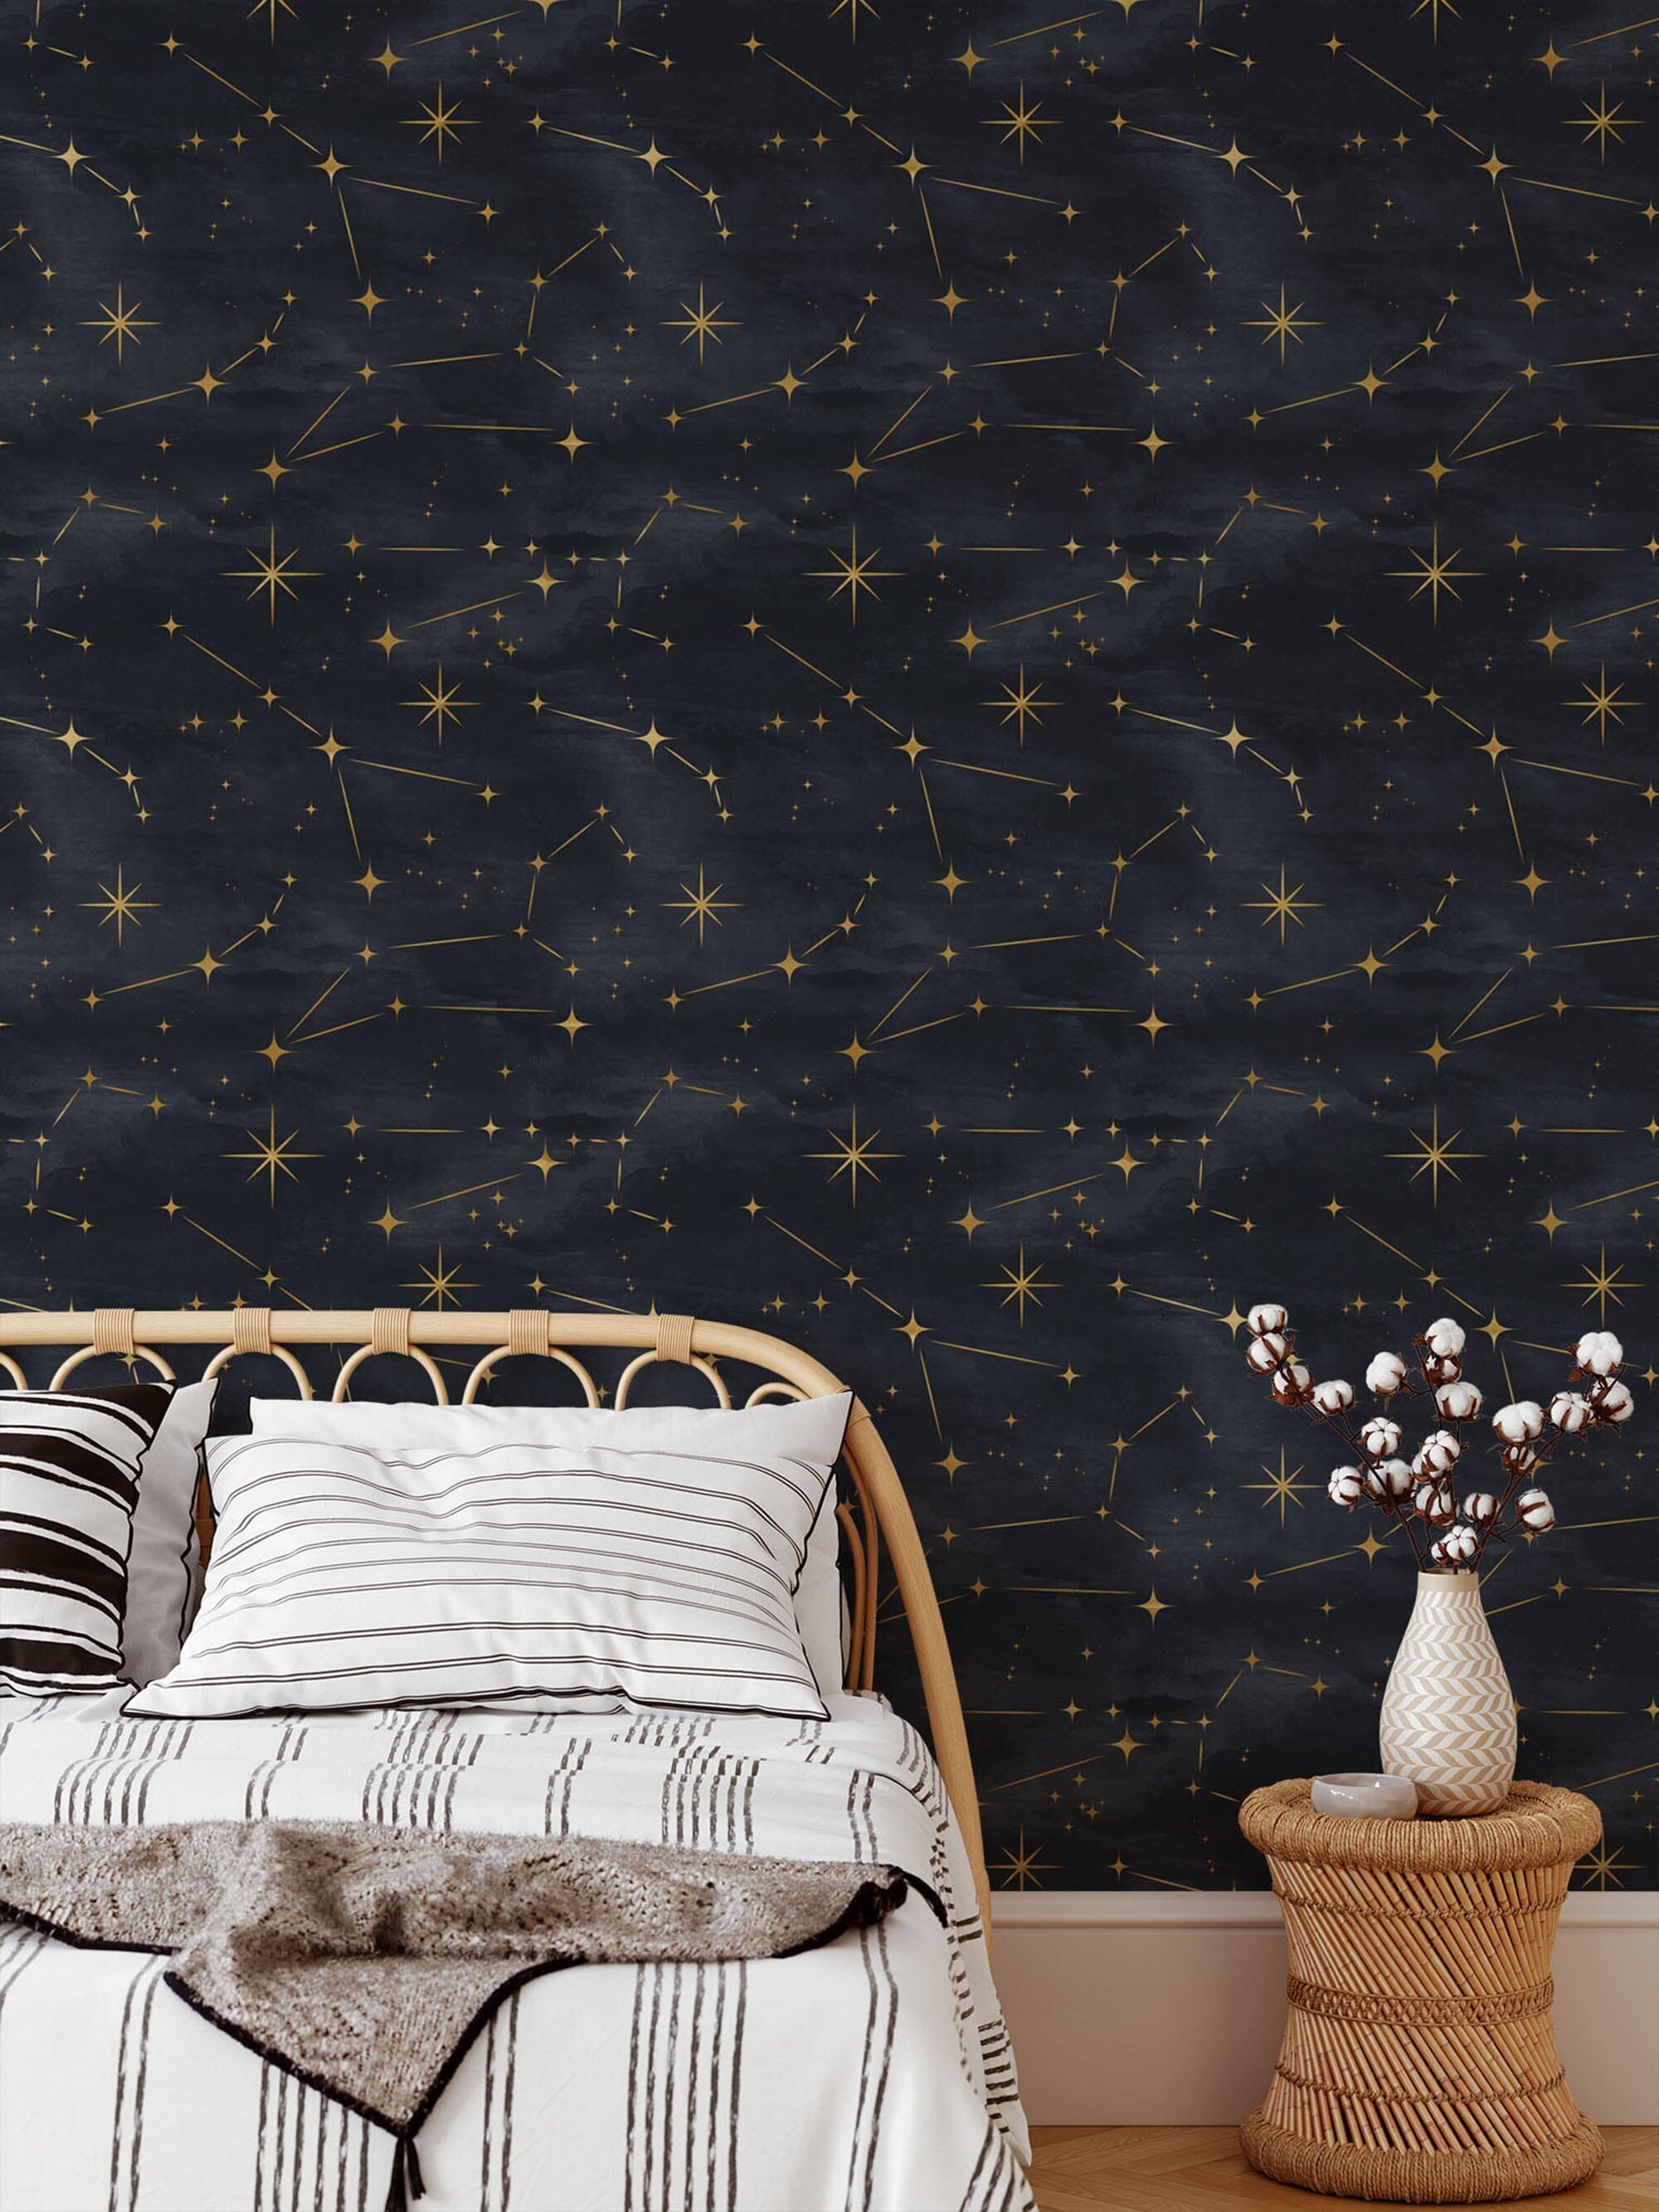 Starry Night Sky Galaxy Peel and Stick Wallpaper Mural  EazzyWalls